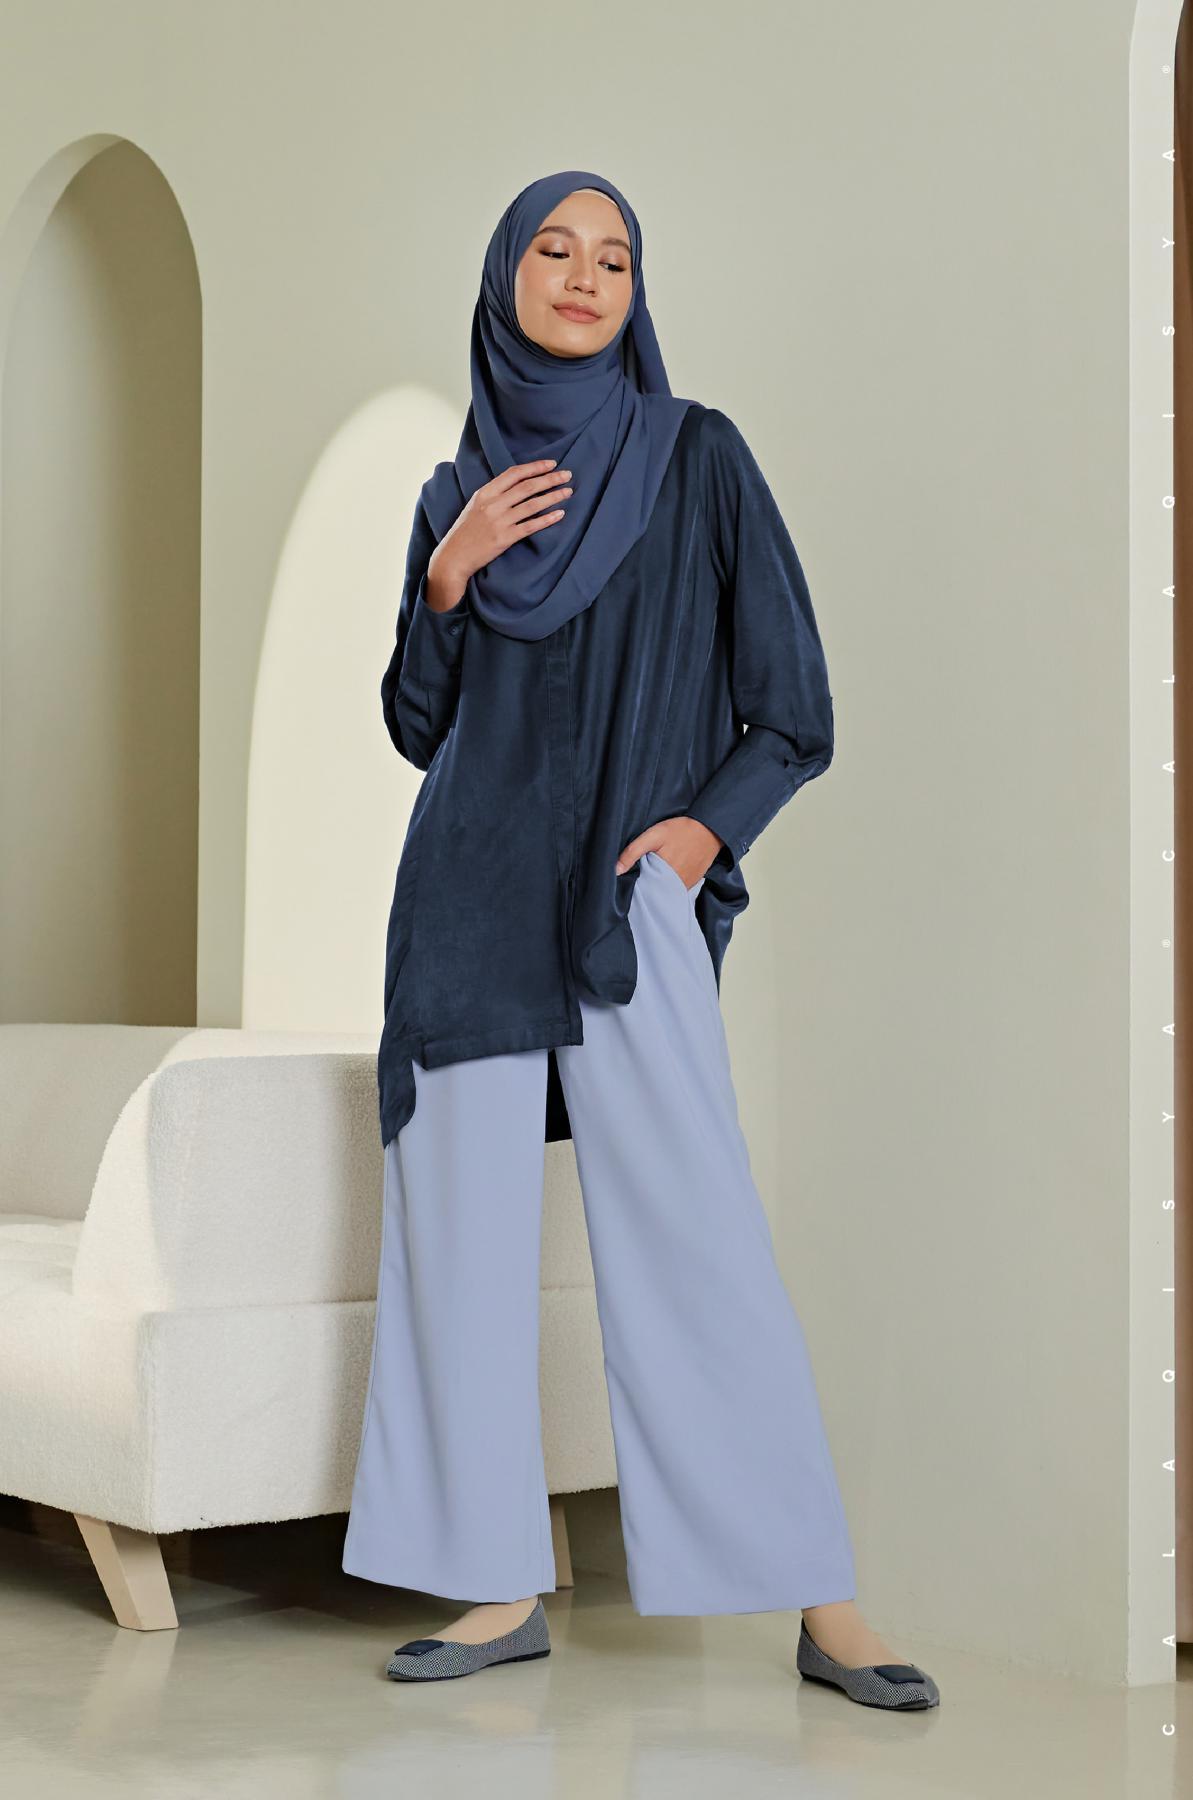 IB PANTS IN CASHMERE BLUE